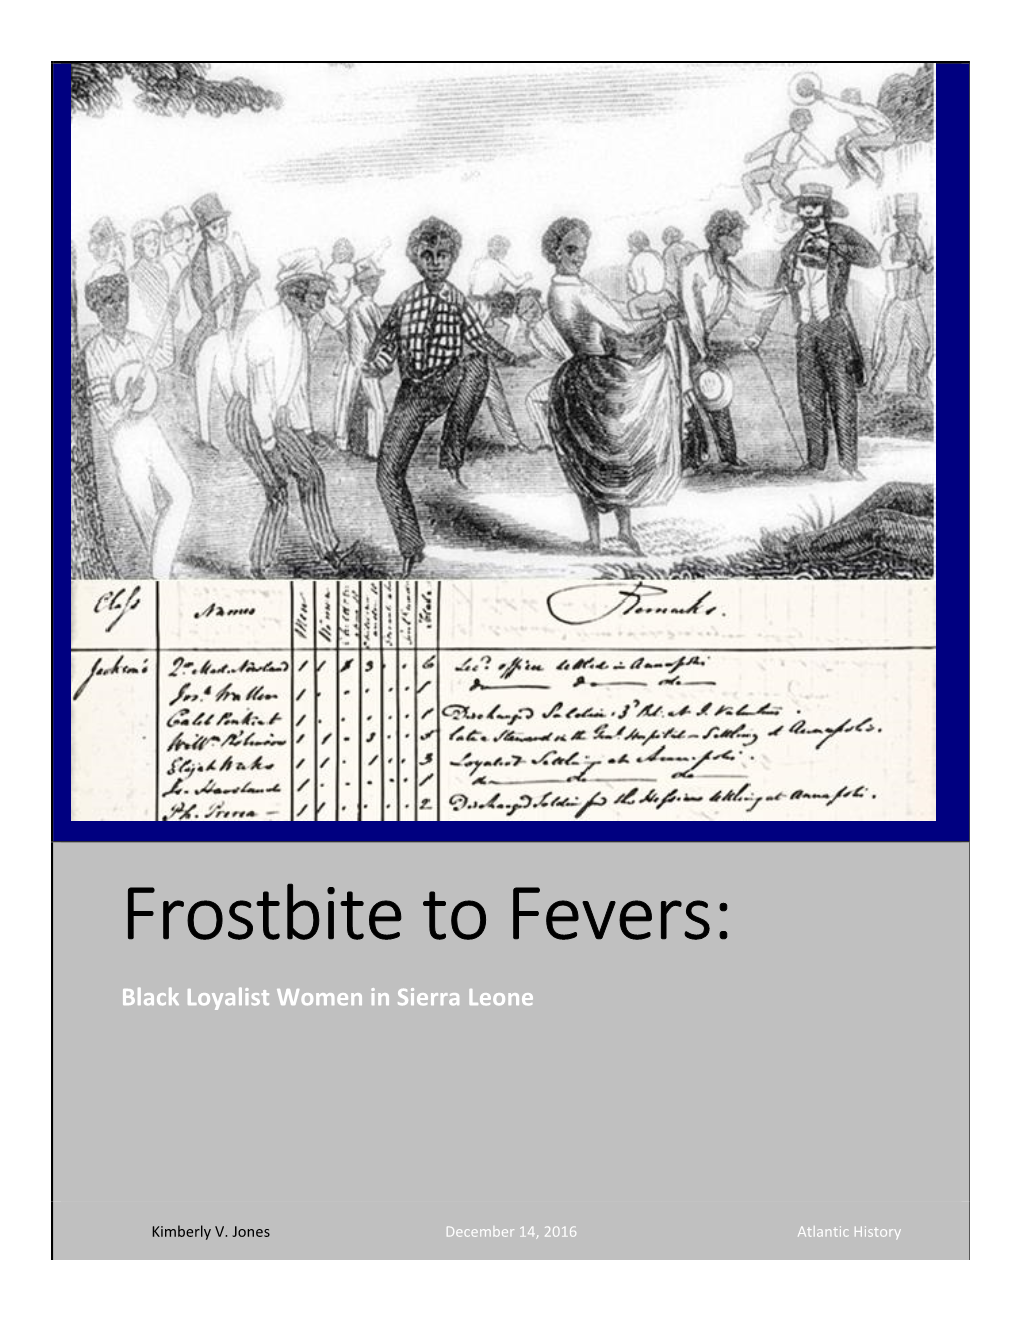 Frostbite to Fevers